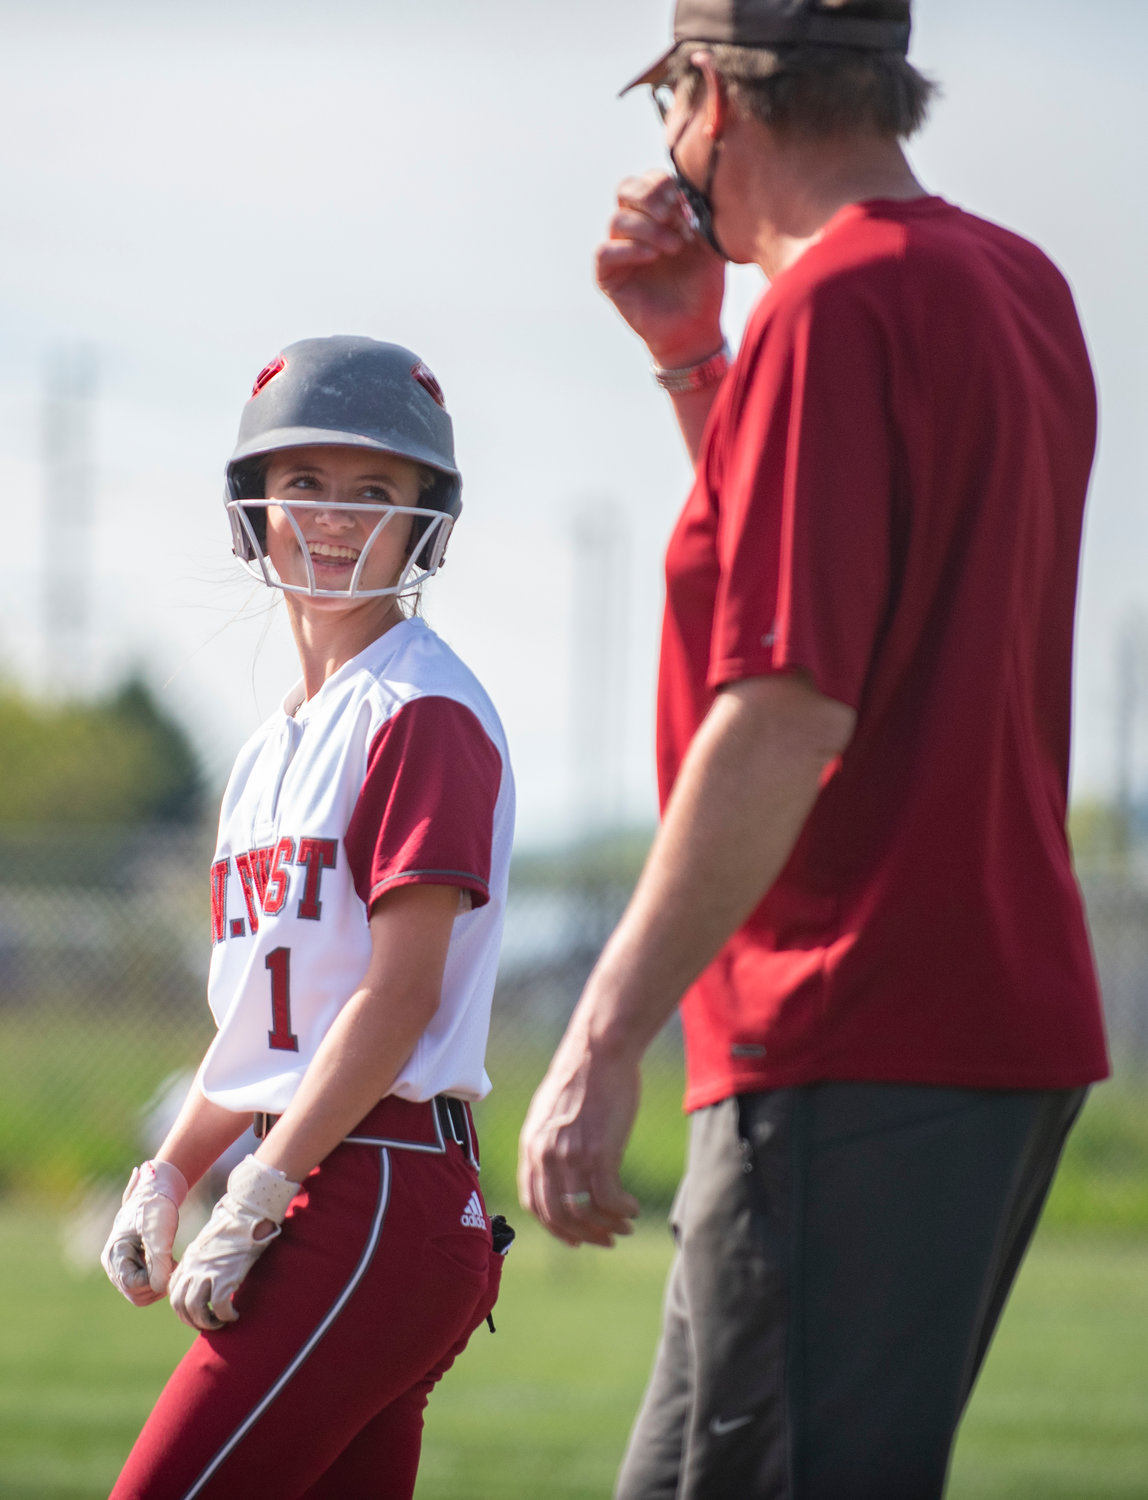 W.F. West sophomore Brielle Etter chats with the Bearcats' first-base coach after hitting a single against Tumwater.